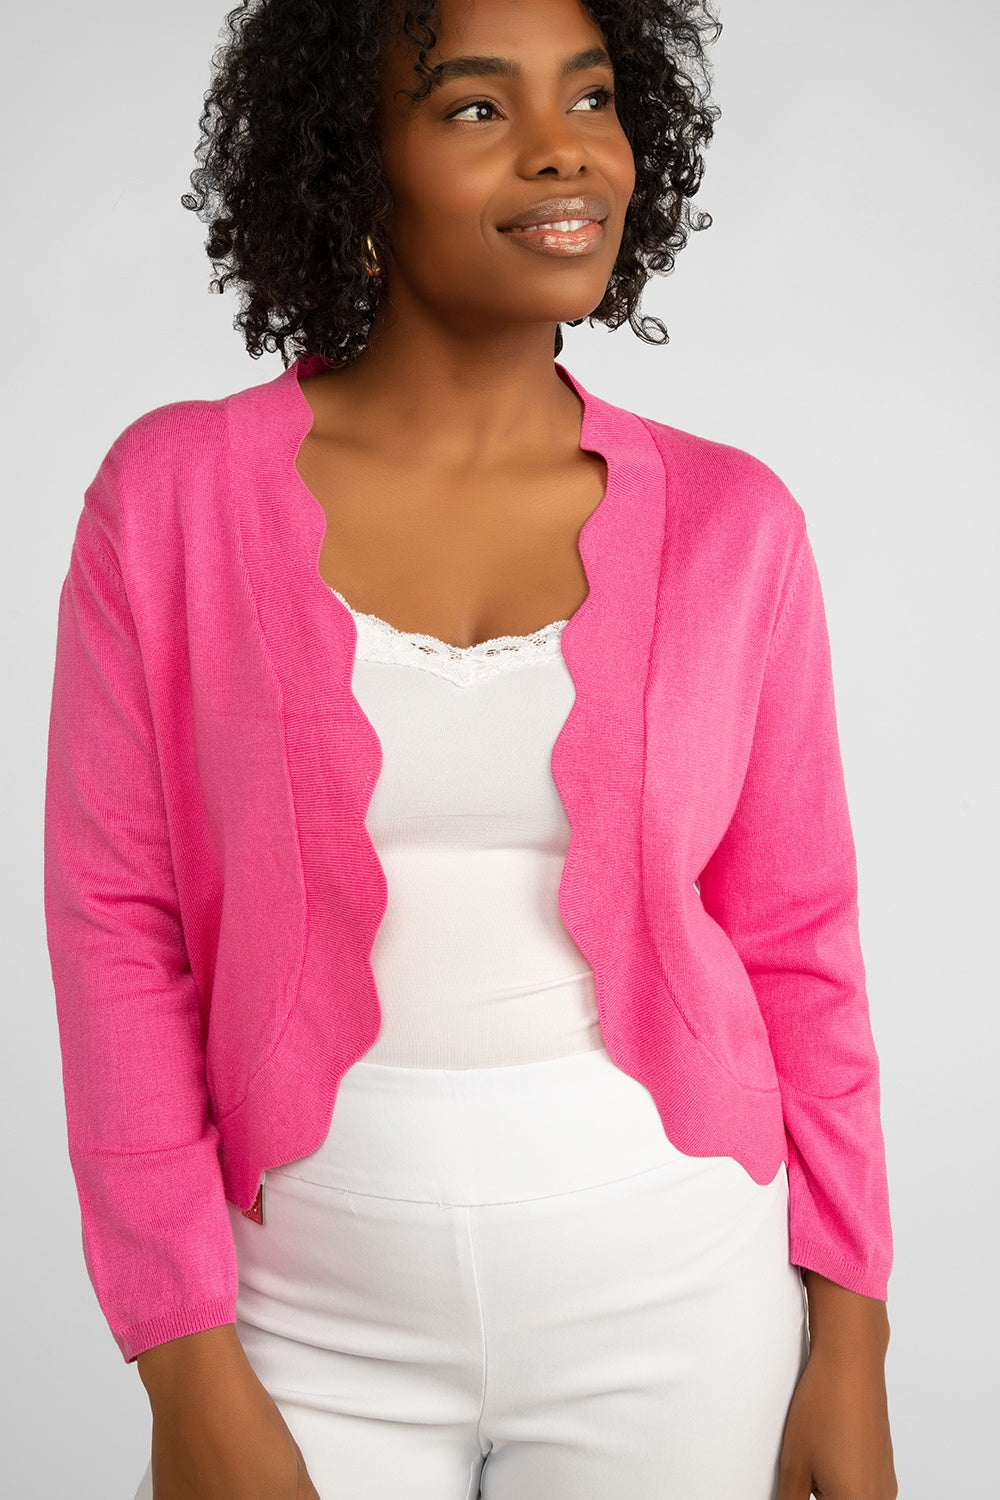 Carre Noir (6912) Women's Long Sleeve Lightweight Knit Open Front Cardigan with Scalloped Edges in Pink